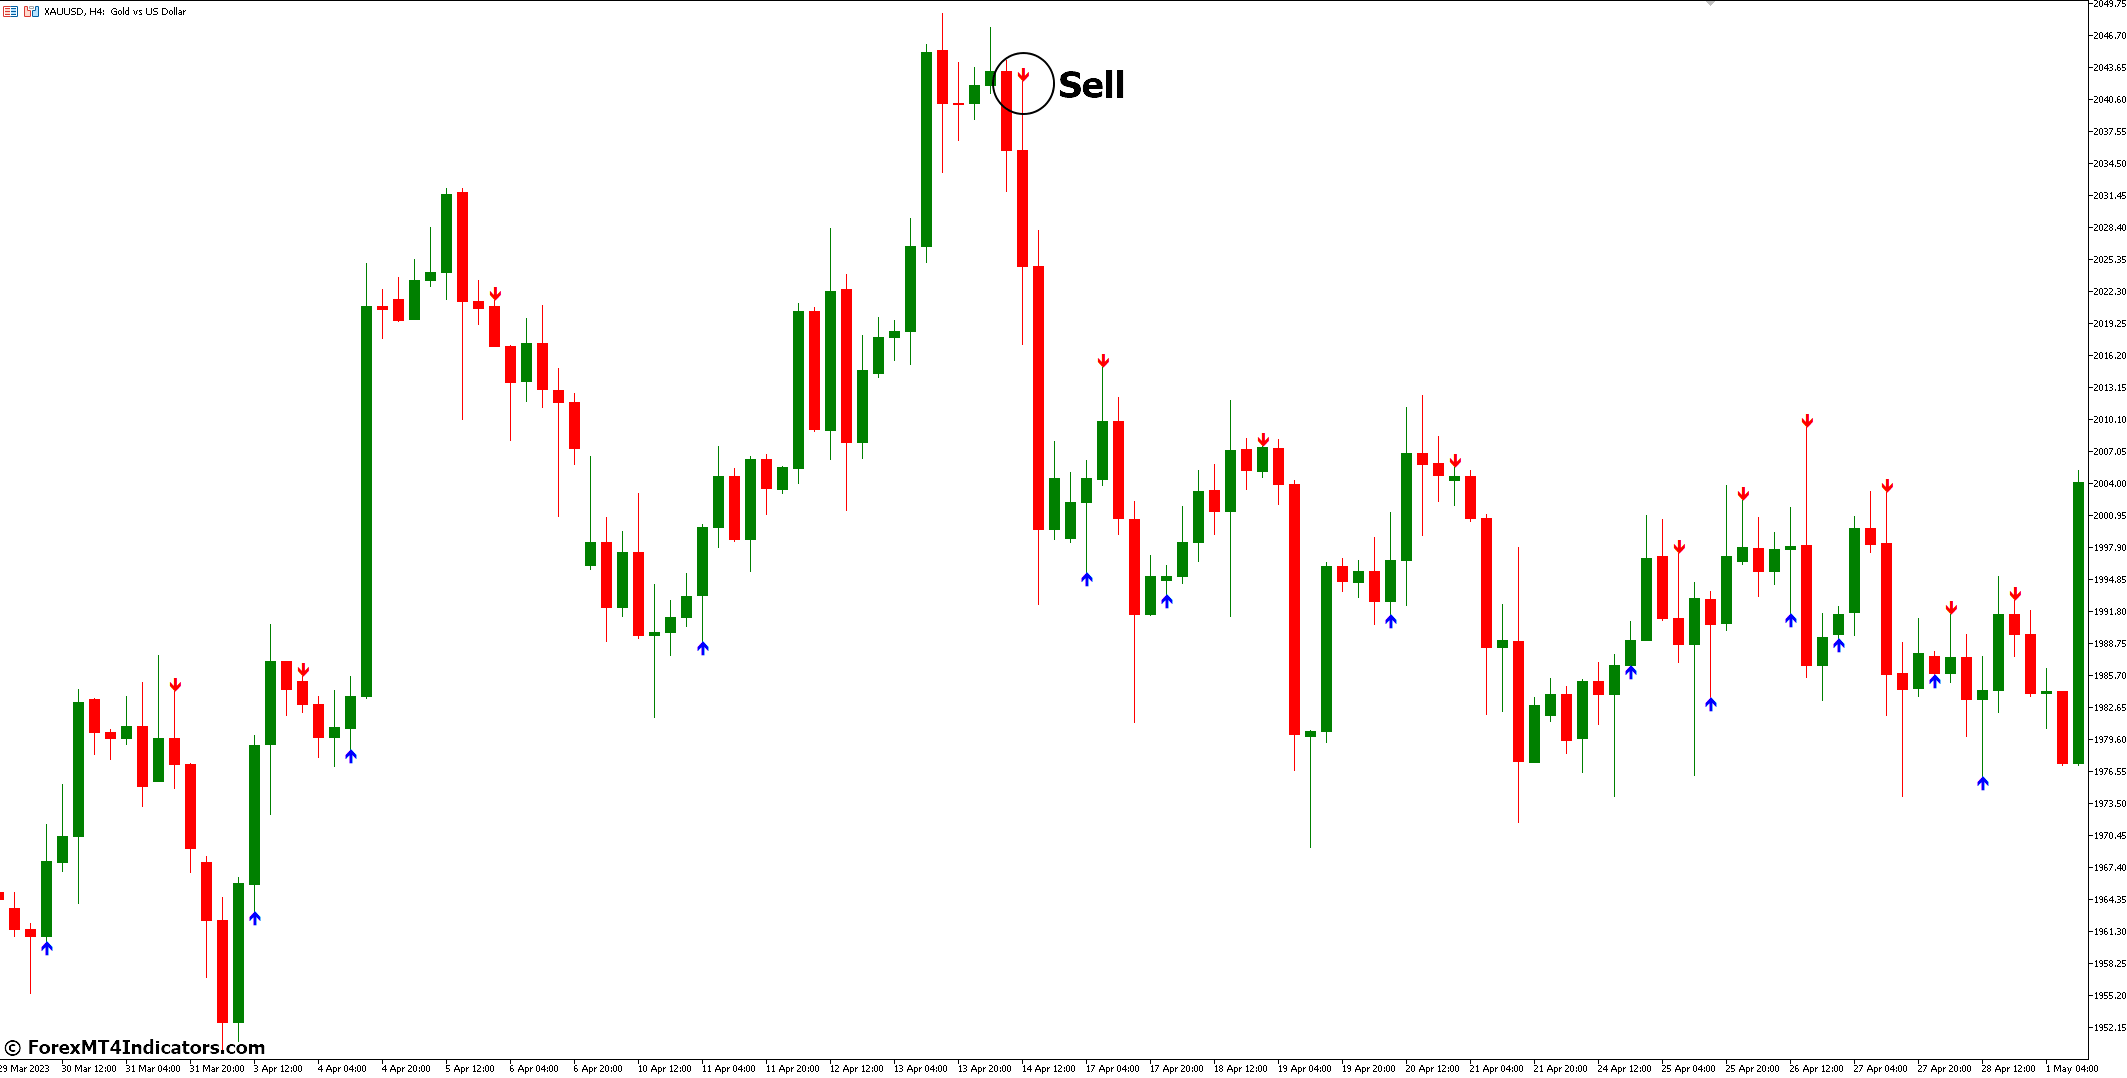 How to Trade with ADX Buy Sell MT5 Indicator - Sell Entry